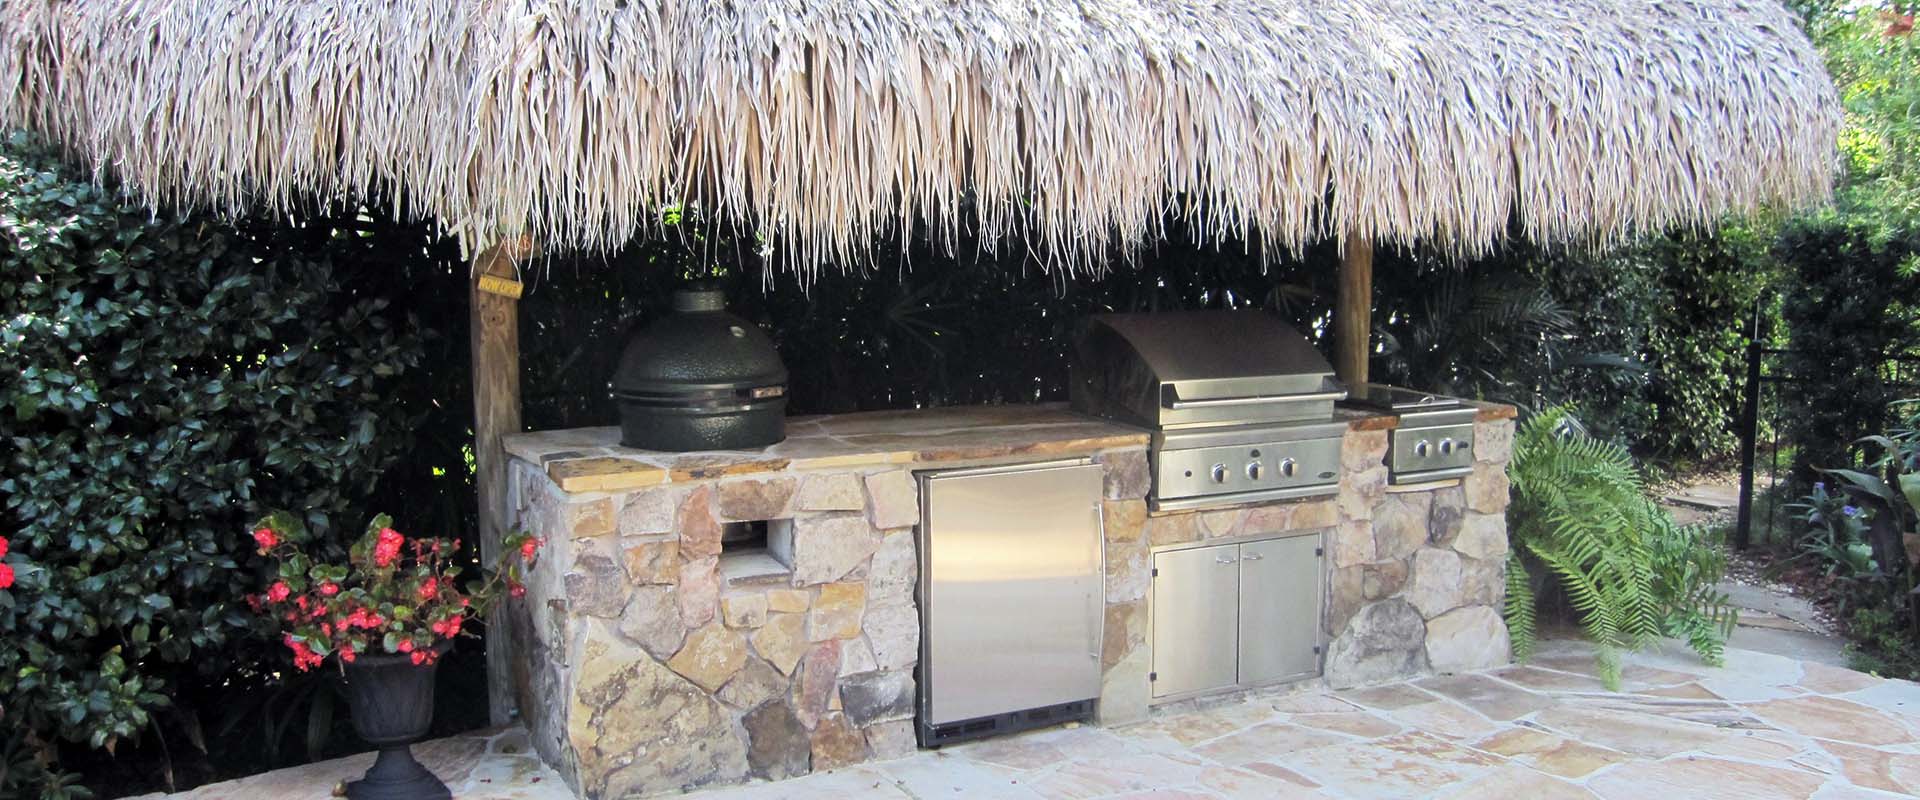 Custom Outdoor Kitchens and Grill Areas by Waterscapes Pool Remodeling